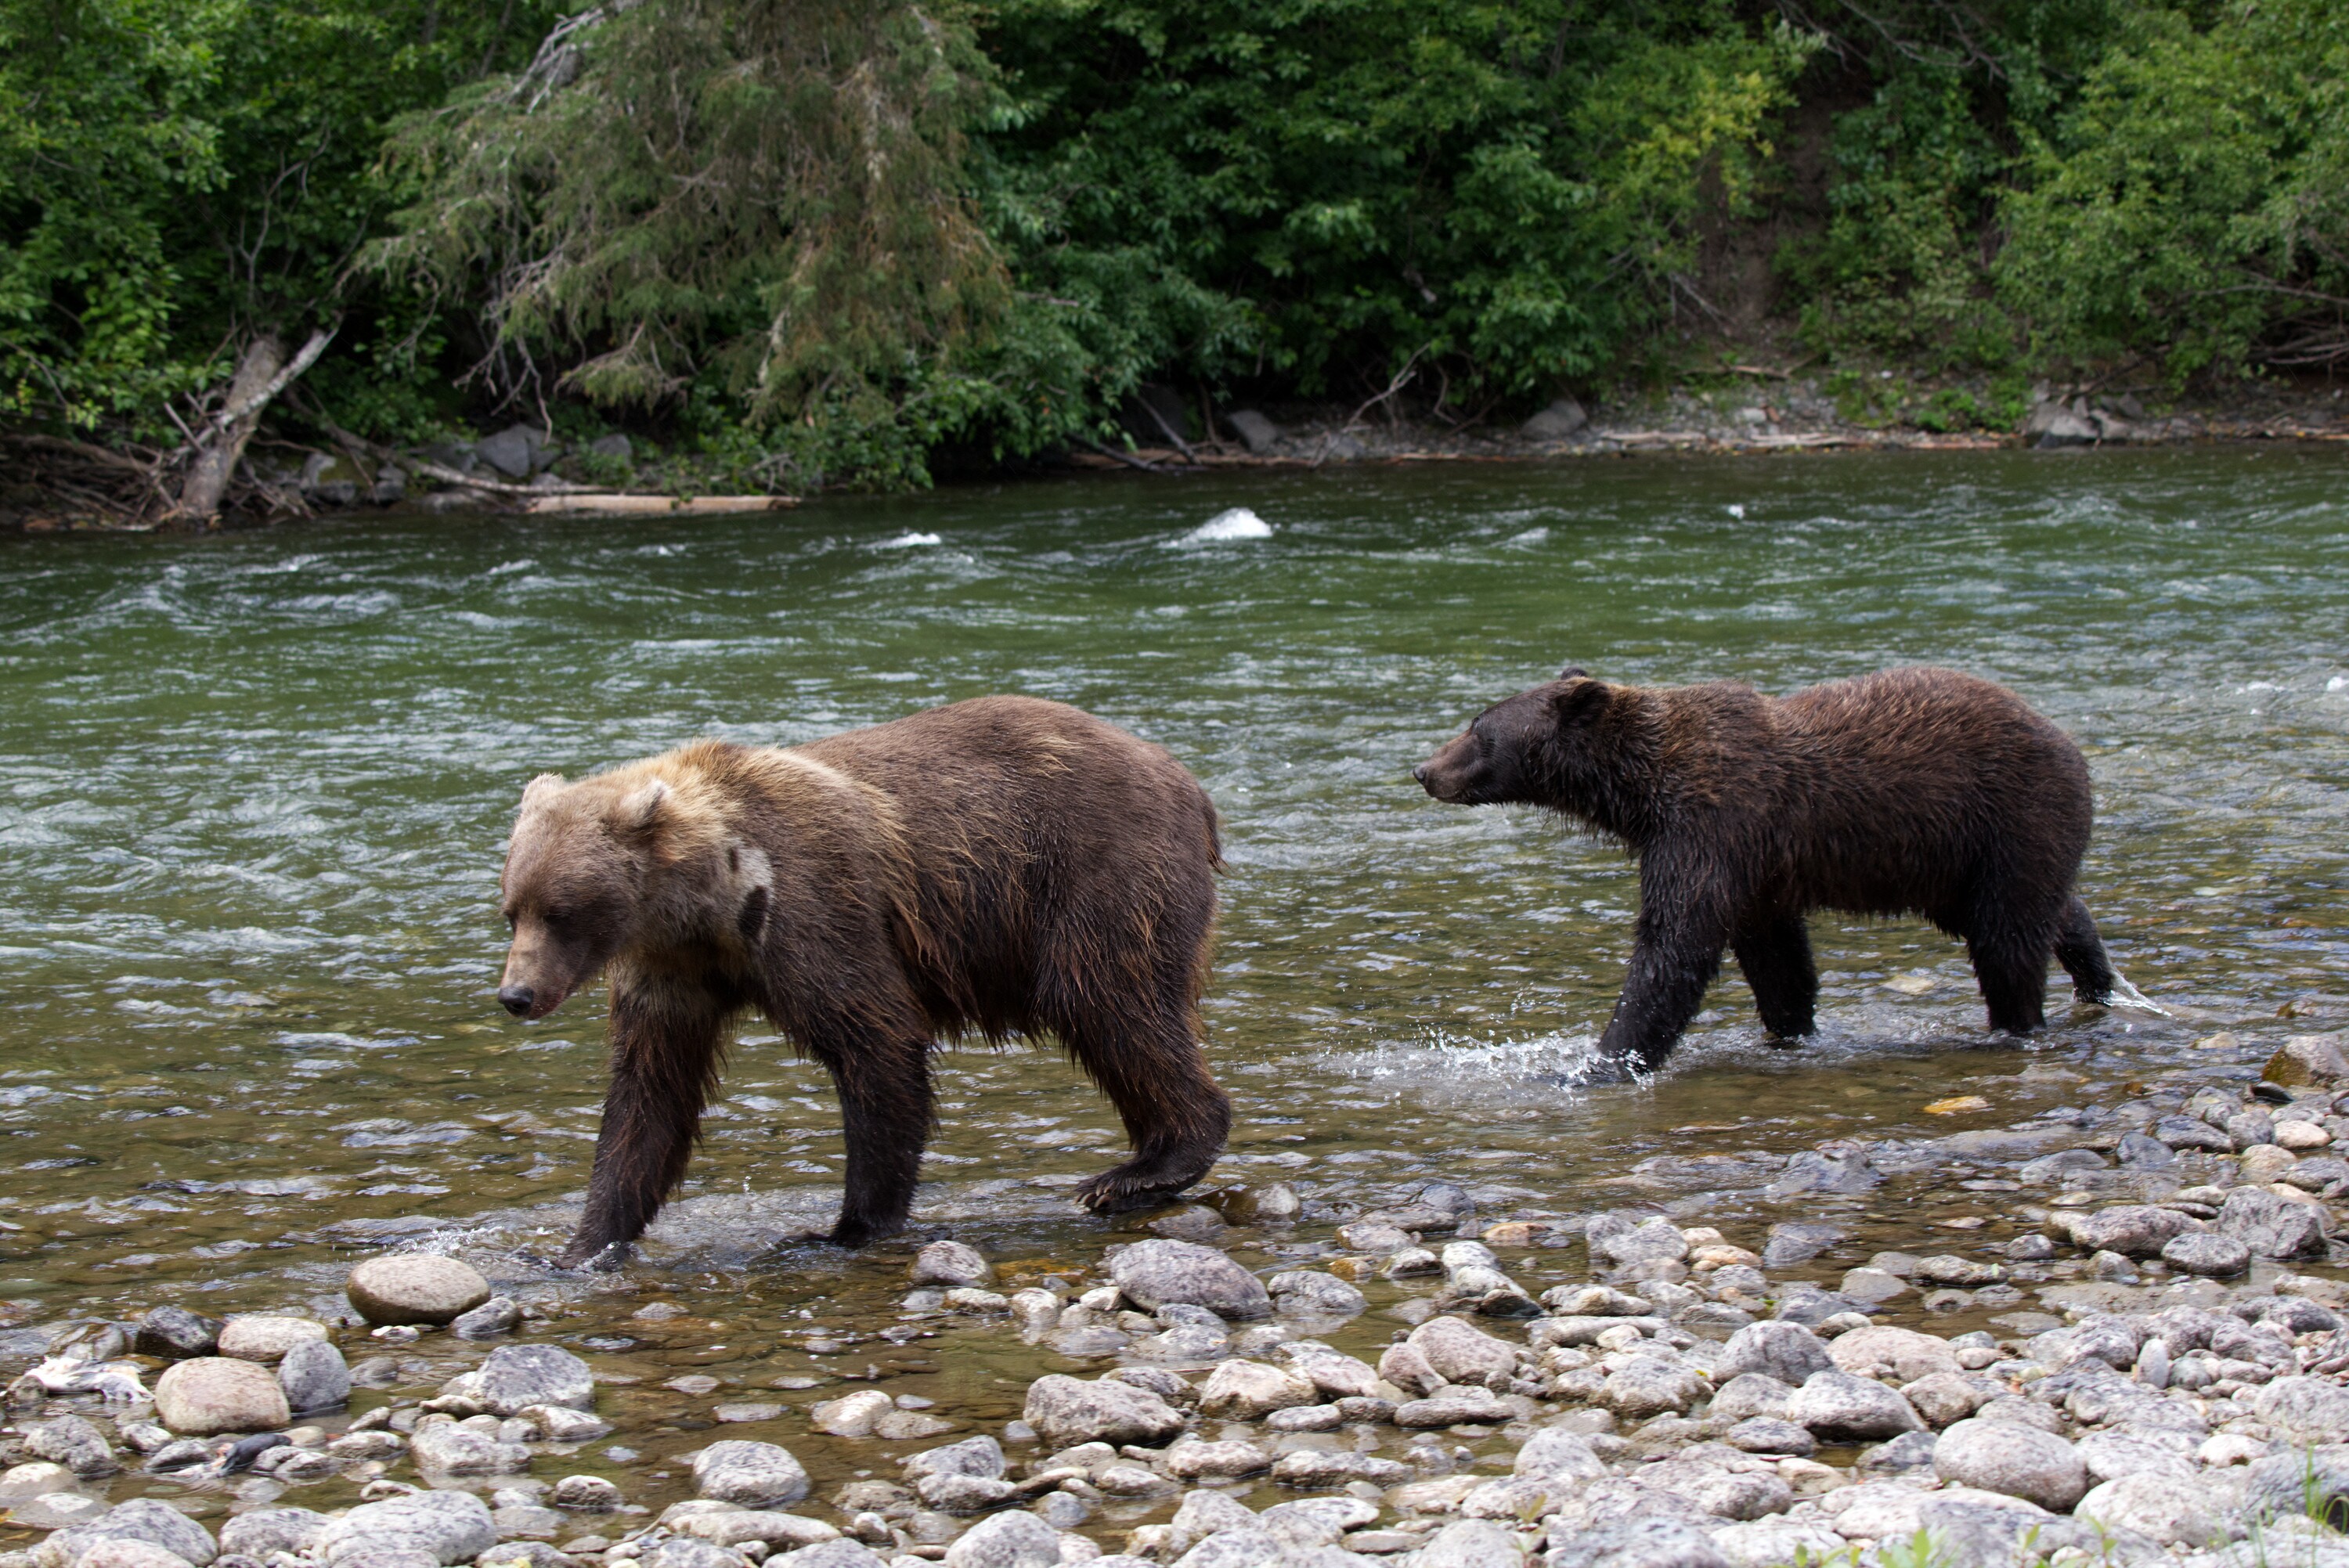 Two bears walk along the riverbank in the Great Bear Rainforest. (National Geographic for Disney+/Samuel Ellis)